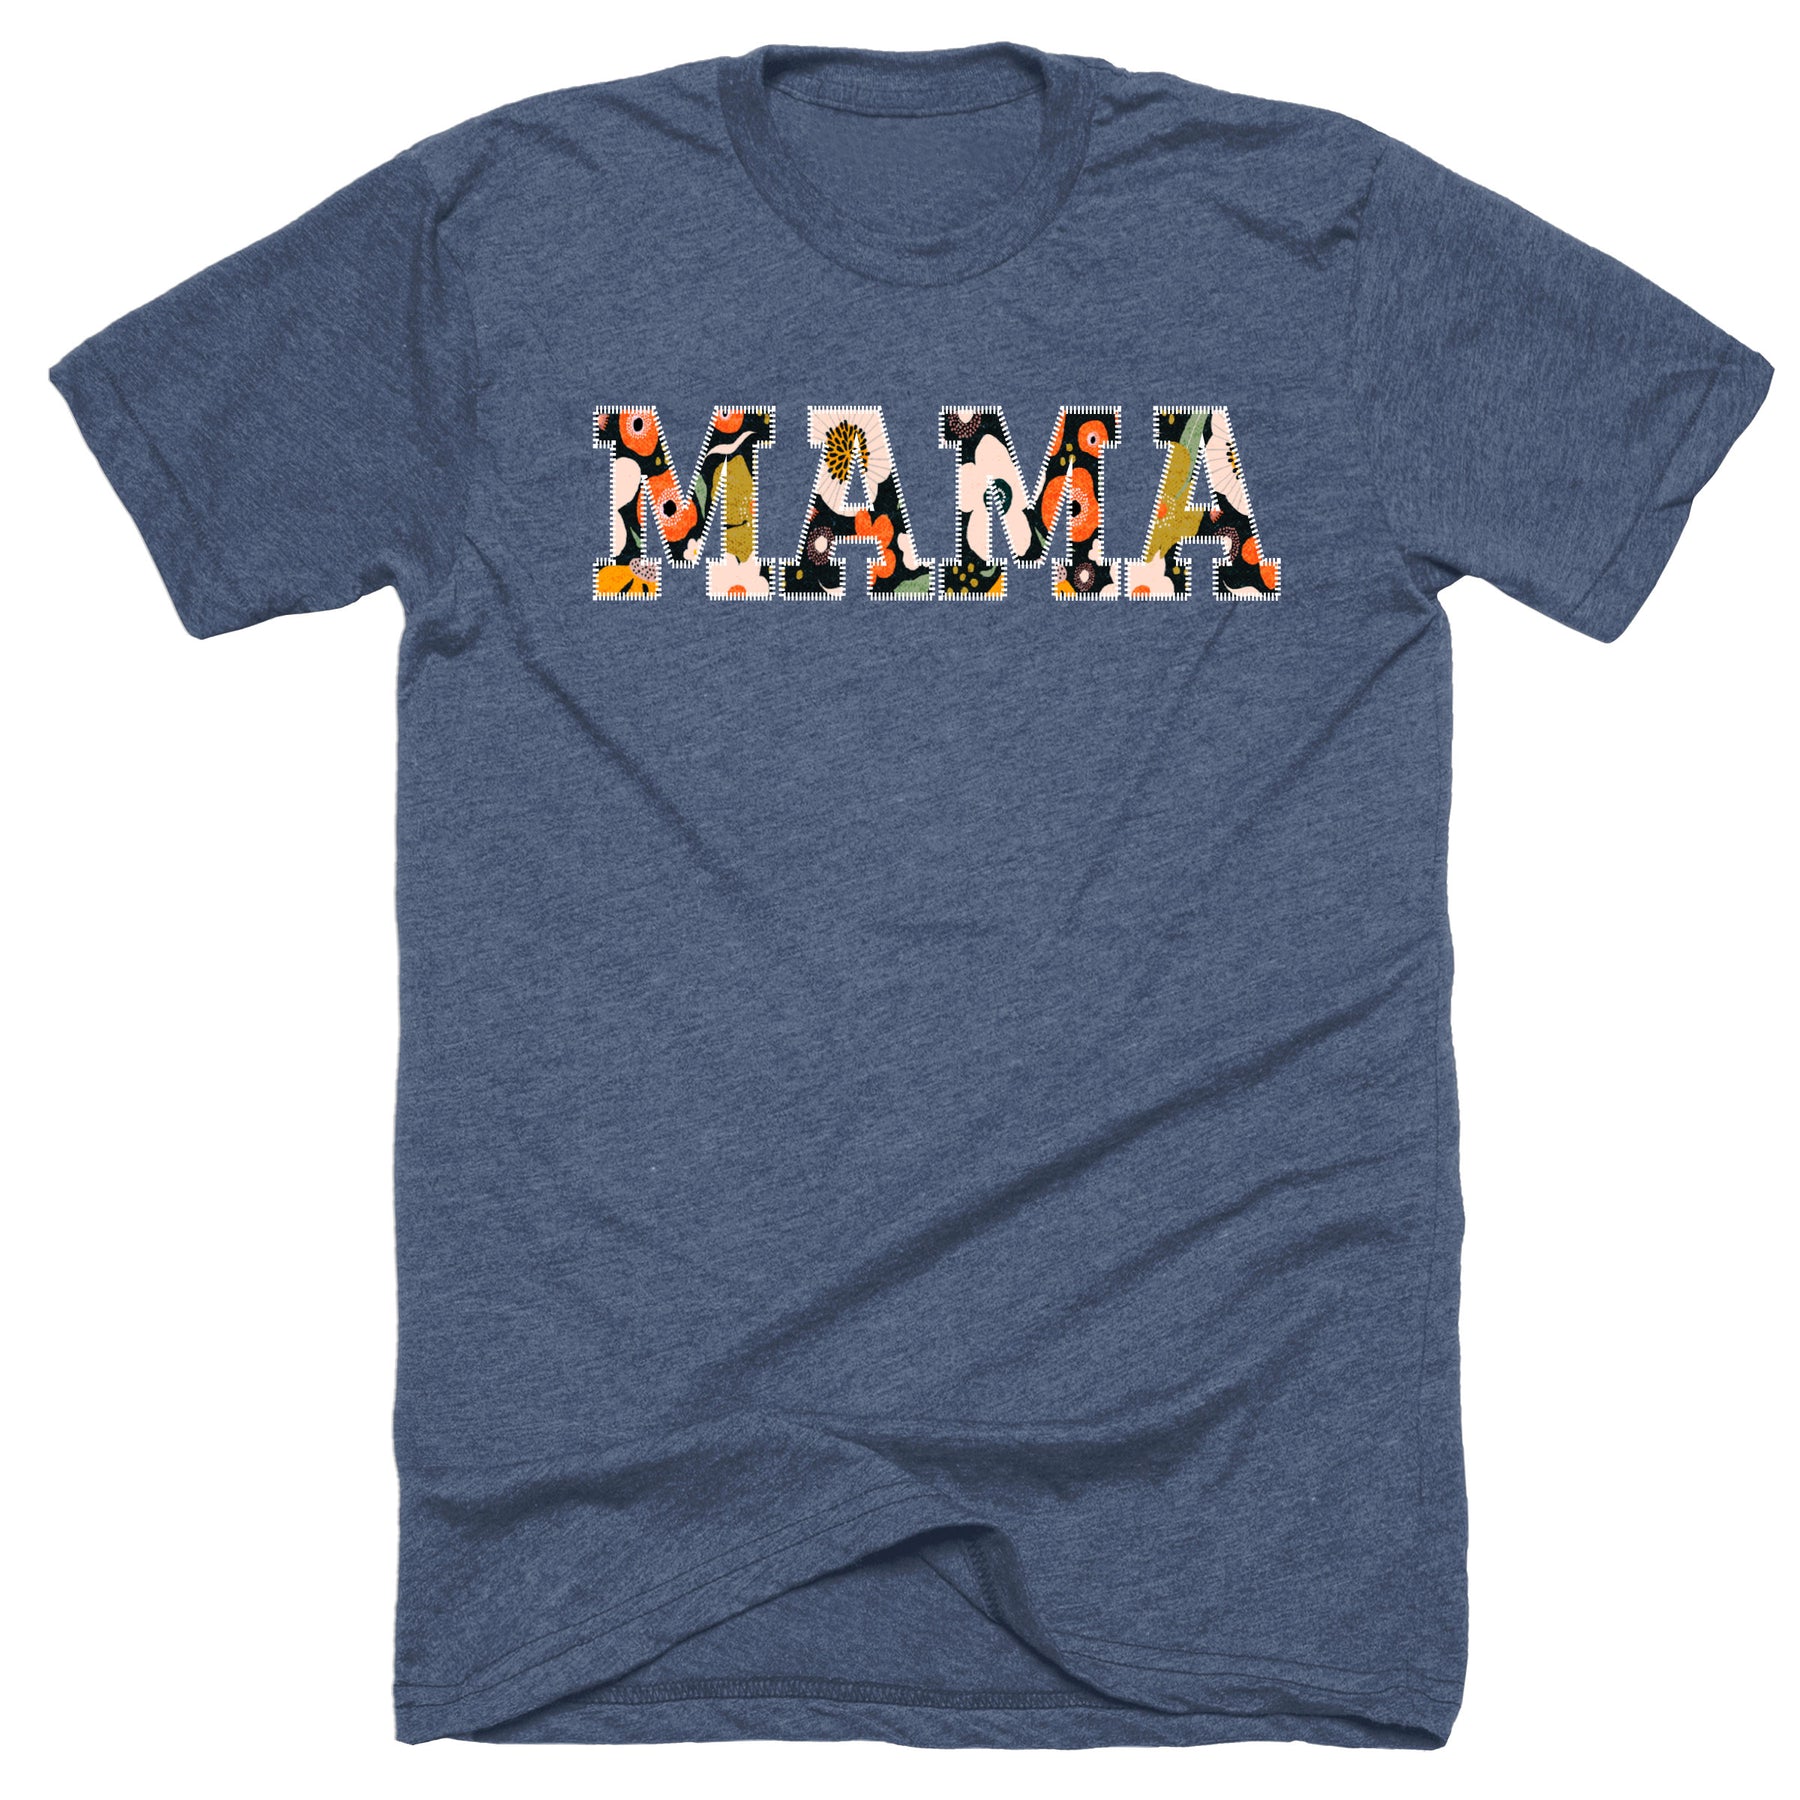 Mama Floral Stitched Letter Tee